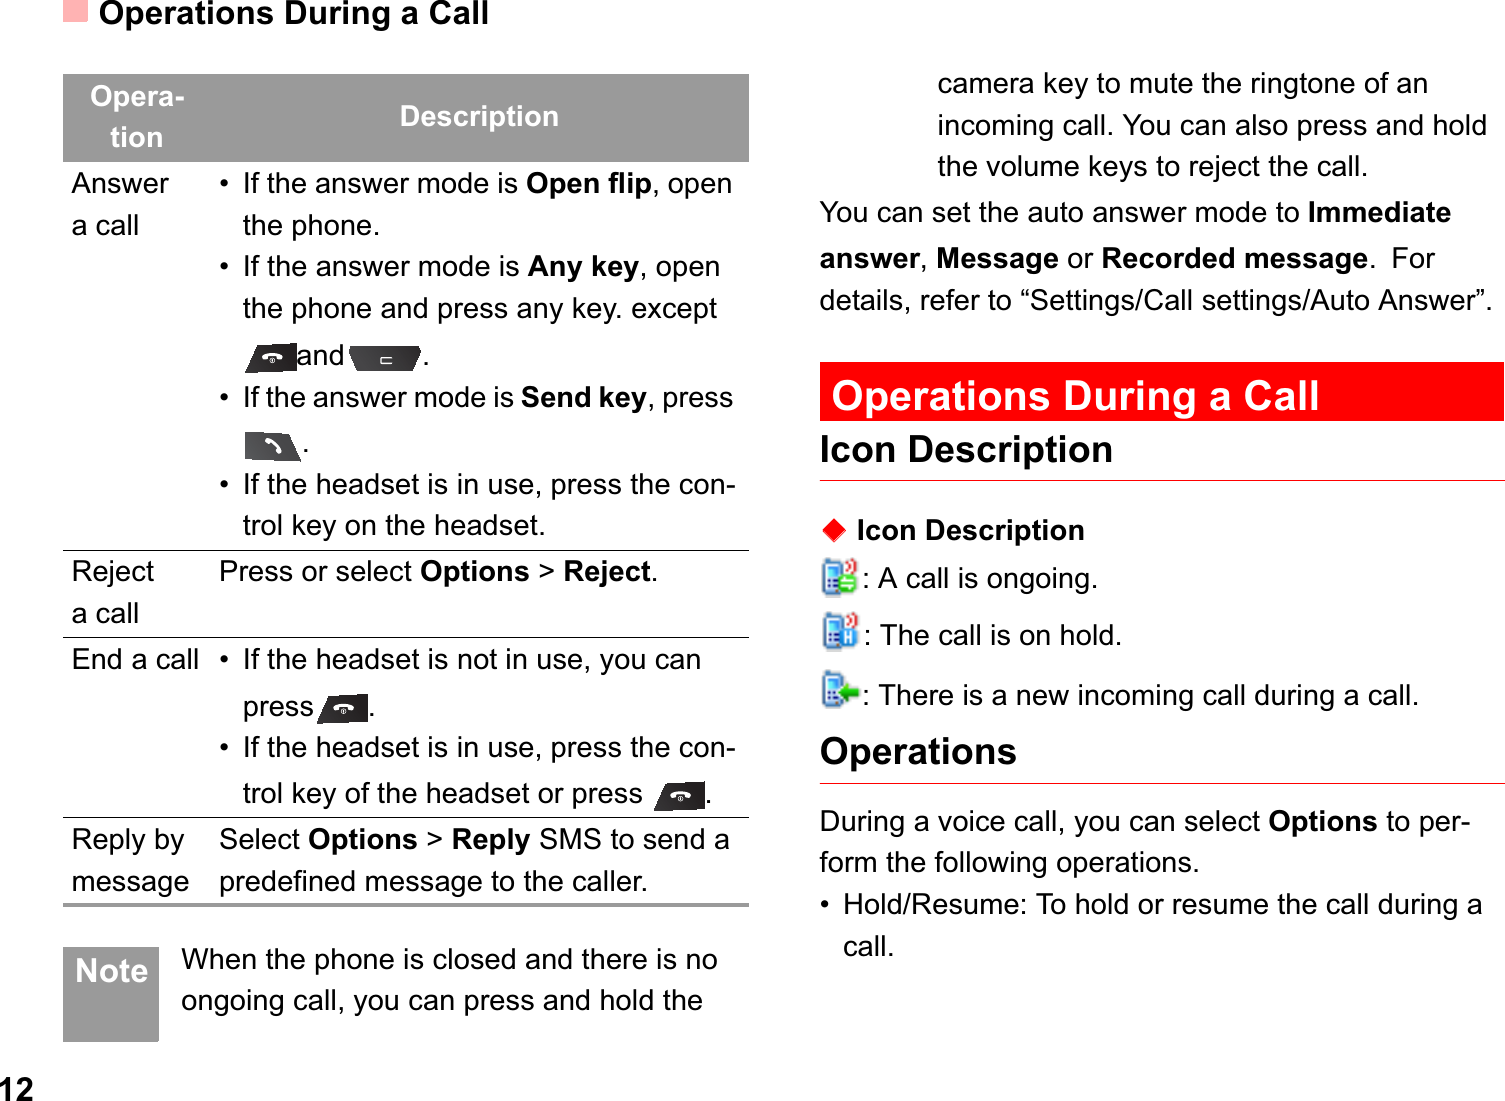 Operations During a Call12 Note When the phone is closed and there is no ongoing call, you can press and hold the camera key to mute the ringtone of an incoming call. You can also press and hold the volume keys to reject the call.You can set the auto answer mode to Immediate answer,Message or Recorded message.For details, refer to “Settings/Call settings/Auto Answer”. Operations During a CallIcon DescriptionƹIcon Description: A call is ongoing.: The call is on hold.: There is a new incoming call during a call.OperationsDuring a voice call, you can select Options to per-form the following operations.• Hold/Resume: To hold or resume the call during a call.Opera-tion DescriptionAnswera call• If the answer mode is Open flip, open the phone.• If the answer mode is Any key, open the phone and press any key. except and .• If the answer mode is Send key, press .• If the headset is in use, press the con-trol key on the headset.Rejecta callPress or select Options &gt; Reject.End a call • If the headset is not in use, you can press . • If the headset is in use, press the con-trol key of the headset or press  .Reply by messageSelect Options &gt; Reply SMS to send a predefined message to the caller.